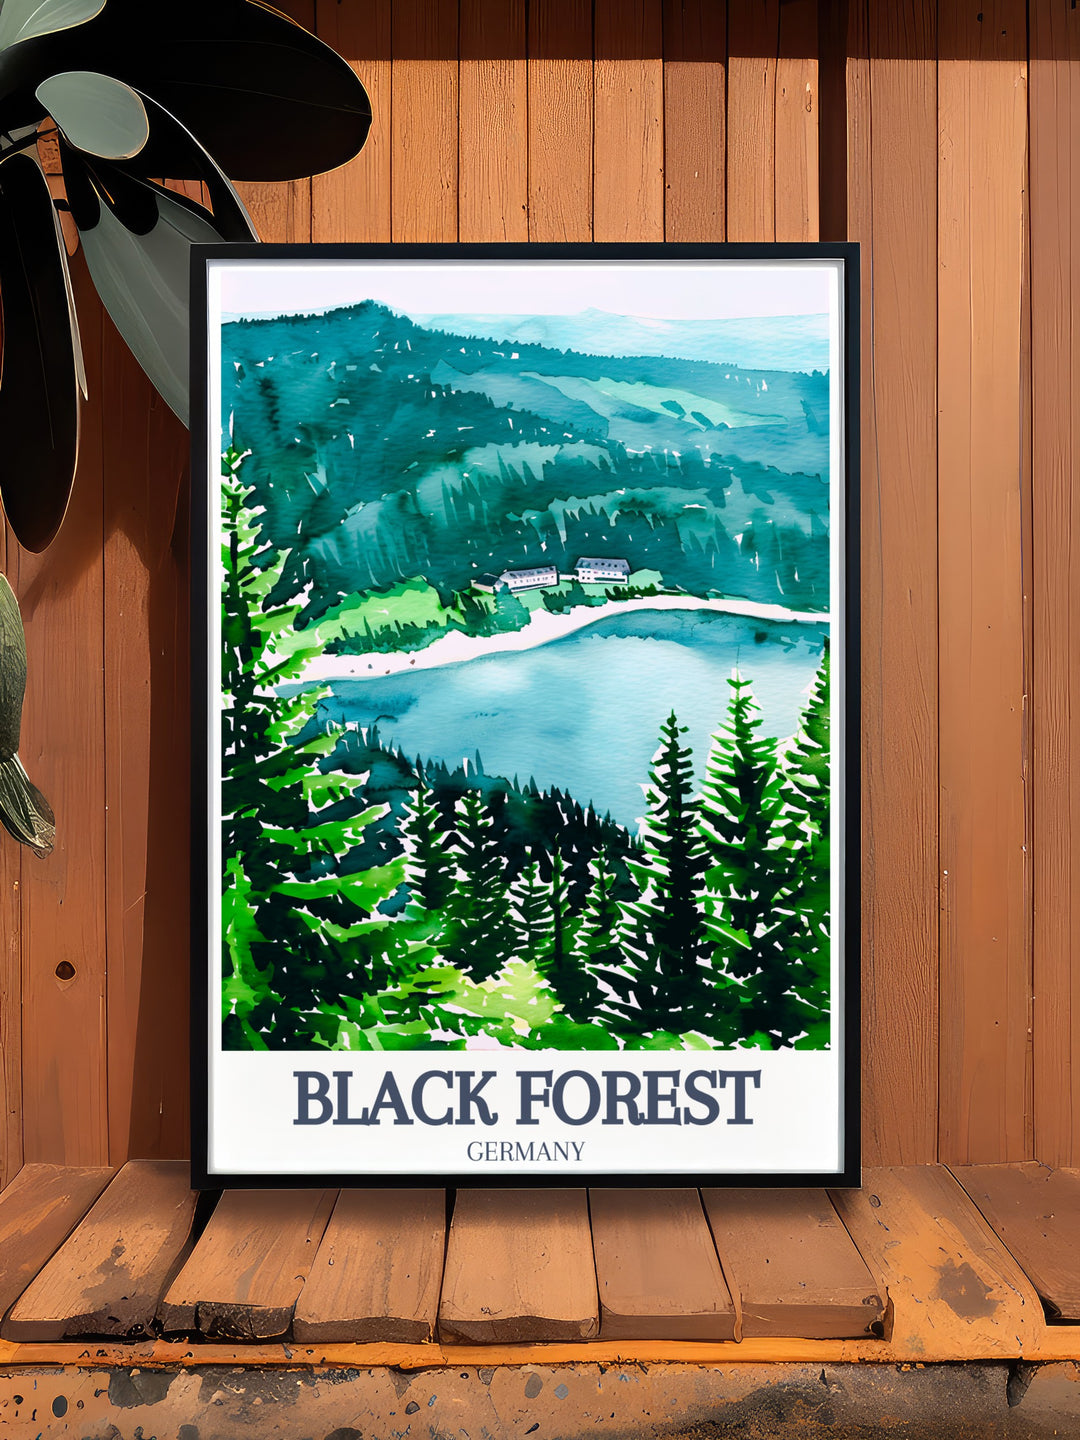 Discover the serene charm of Mummelsee Lake, Triberg Waterfalls with this exquisite Schwarzwald Poster a perfect addition to any home decor offering a window into the enchanting Black Forest landscape ideal for those who appreciate the tranquility of Germanys natural wonders